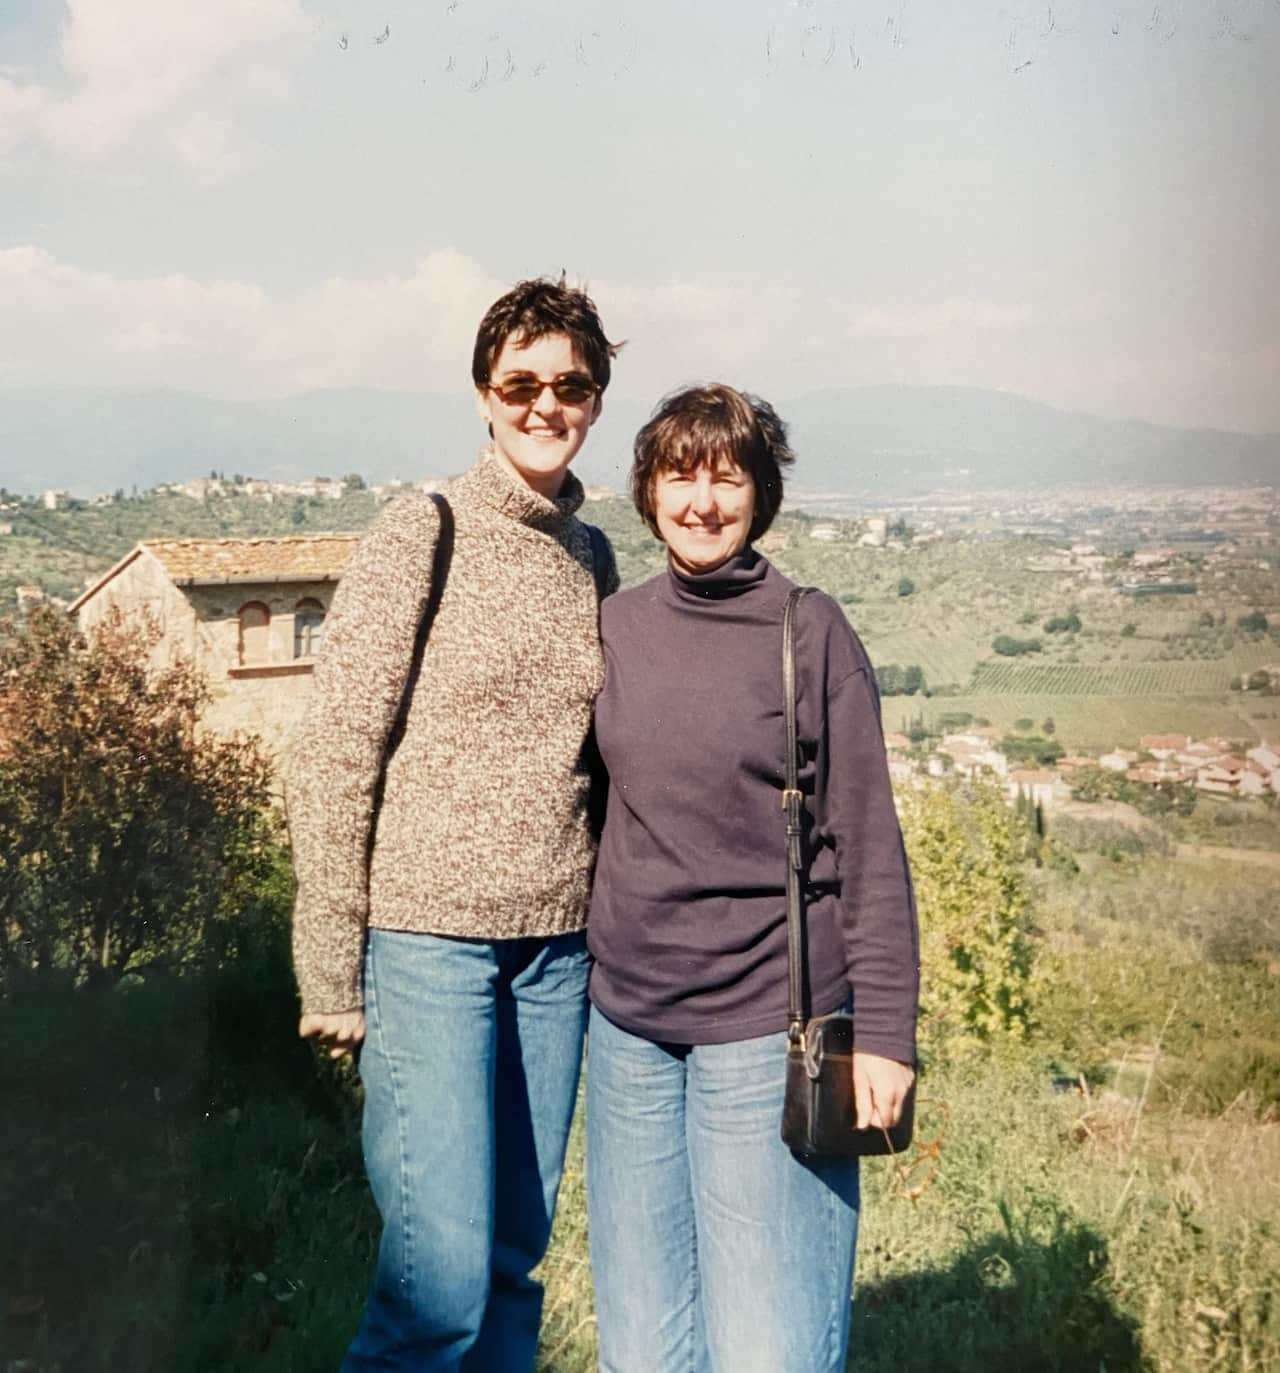 Two women stand together in the sunshine, smiling at the camera. It looks like they're on holiday.